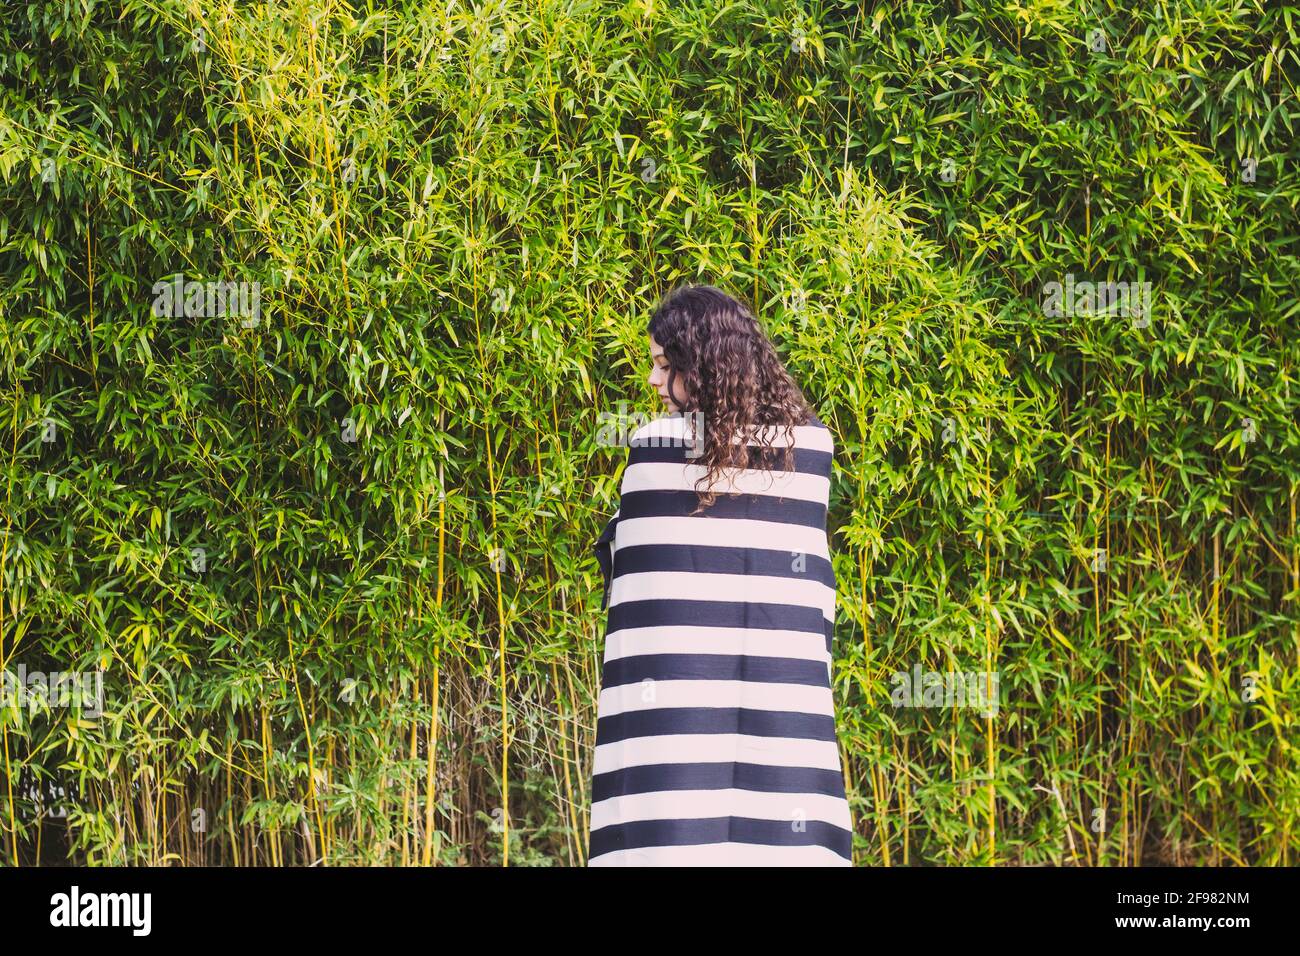 woman covered with striped blanket in field against bamboo leaves Stock Photo